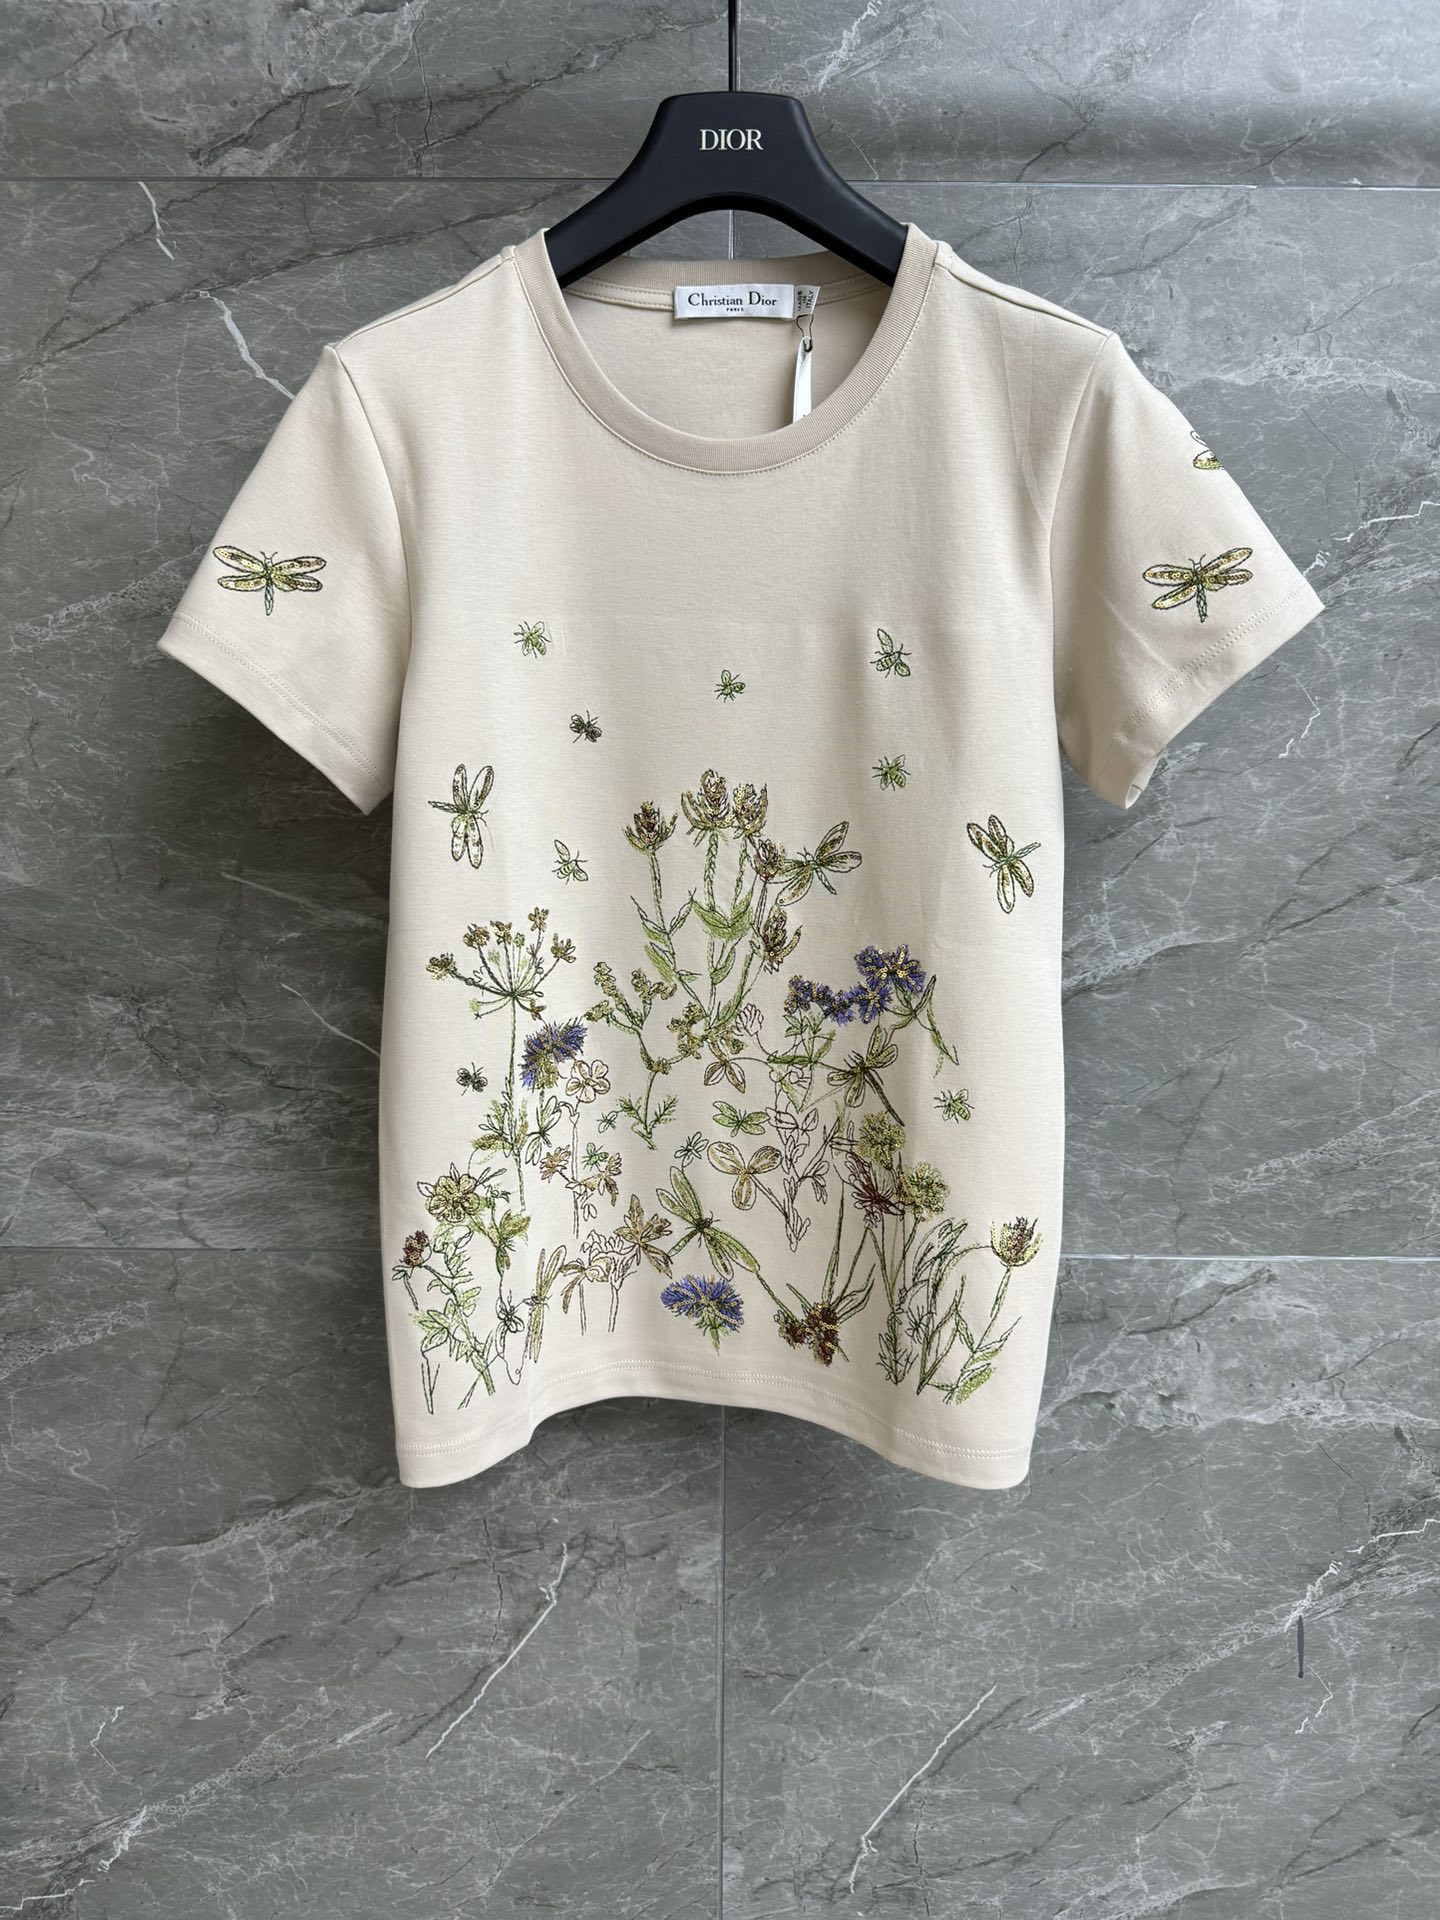 Dior Clothing T-Shirt Online Shop
 Embroidery Cotton Spring/Summer Collection